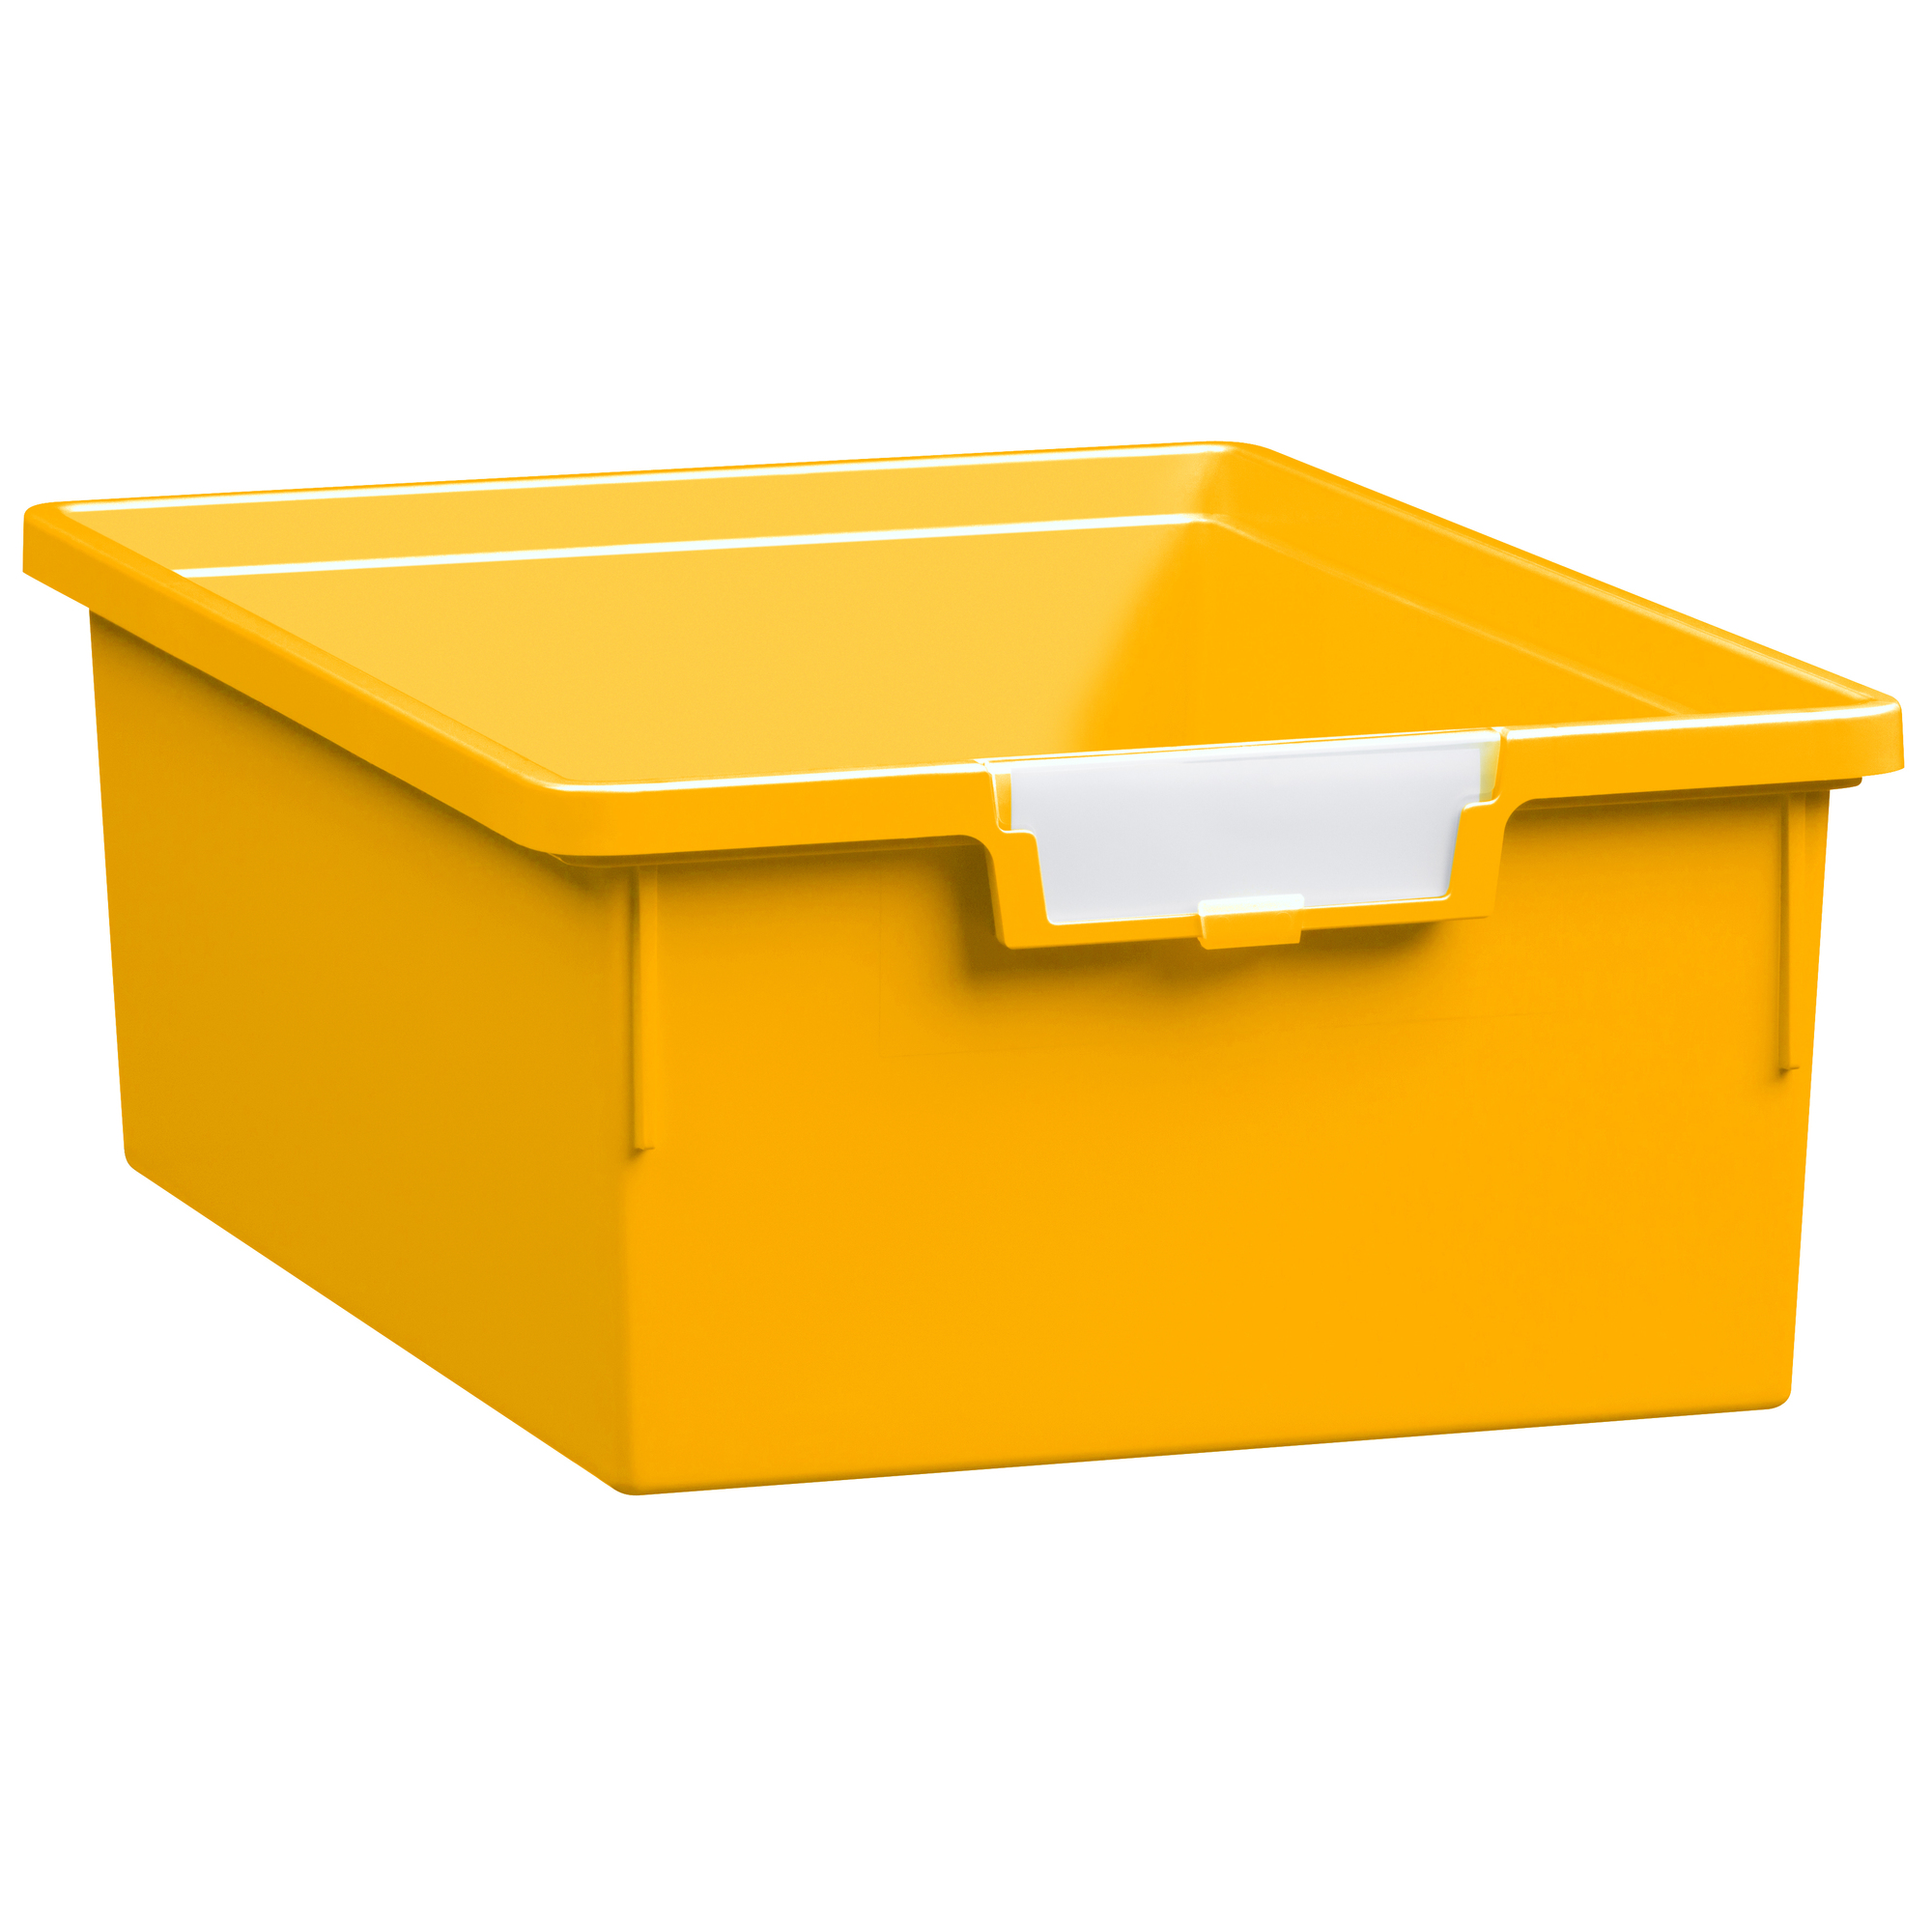 Certwood StorWerks, Slim Line 6Inch Tray in Primary Yellow-1PK, Included (qty.) 1 Height 6 in, Model CE1952PY1